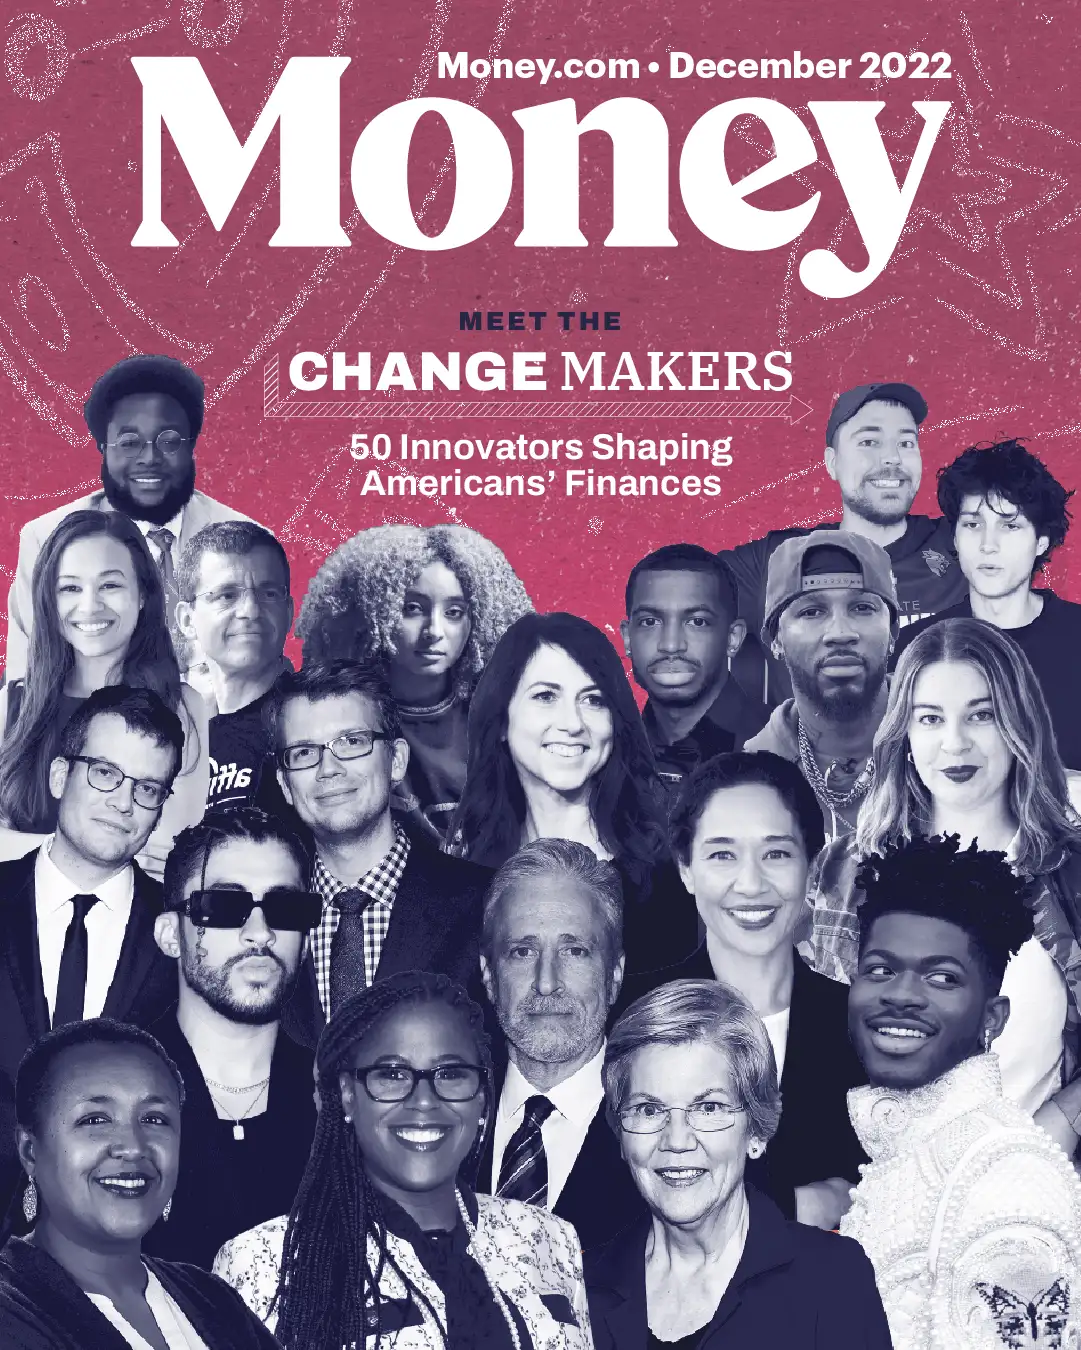 Digital cover for Money magazine featuring a collage of many artists and financial influencers on top of an illustrated chalk-drawing background